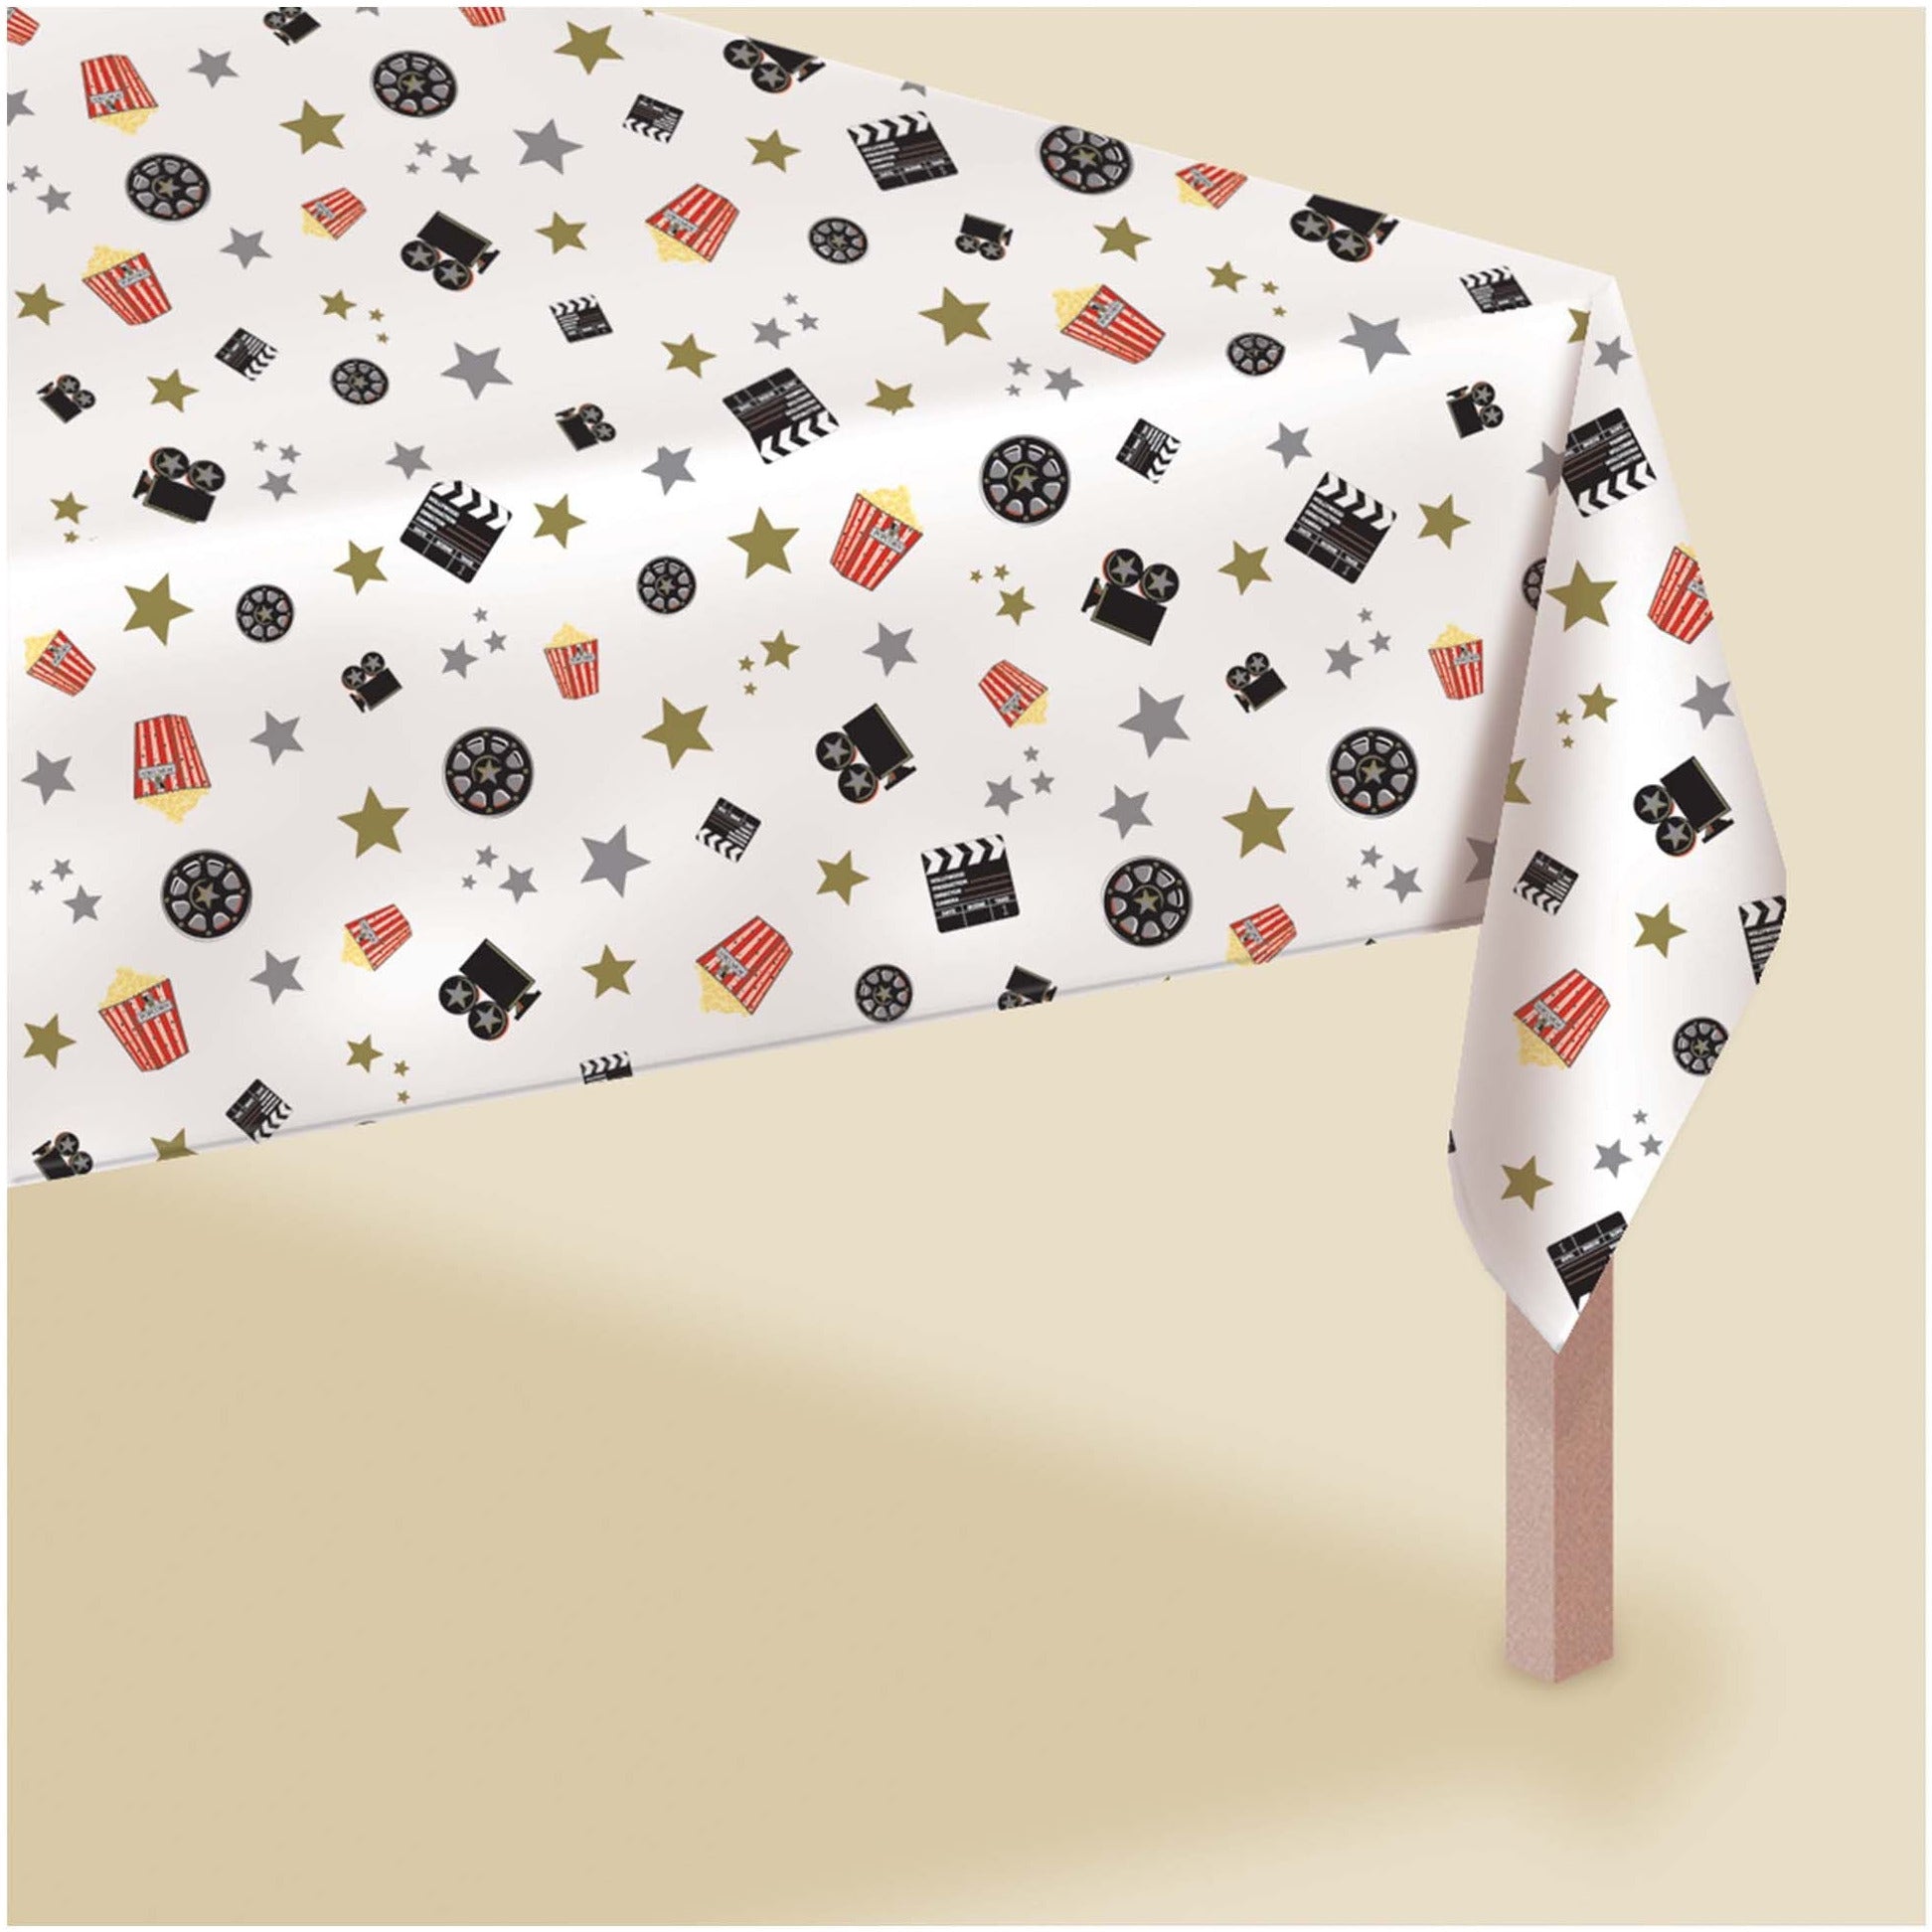 Amscan THEME: HOLLYWOOD Director's Cut Plastic Table Cover - Popcorn